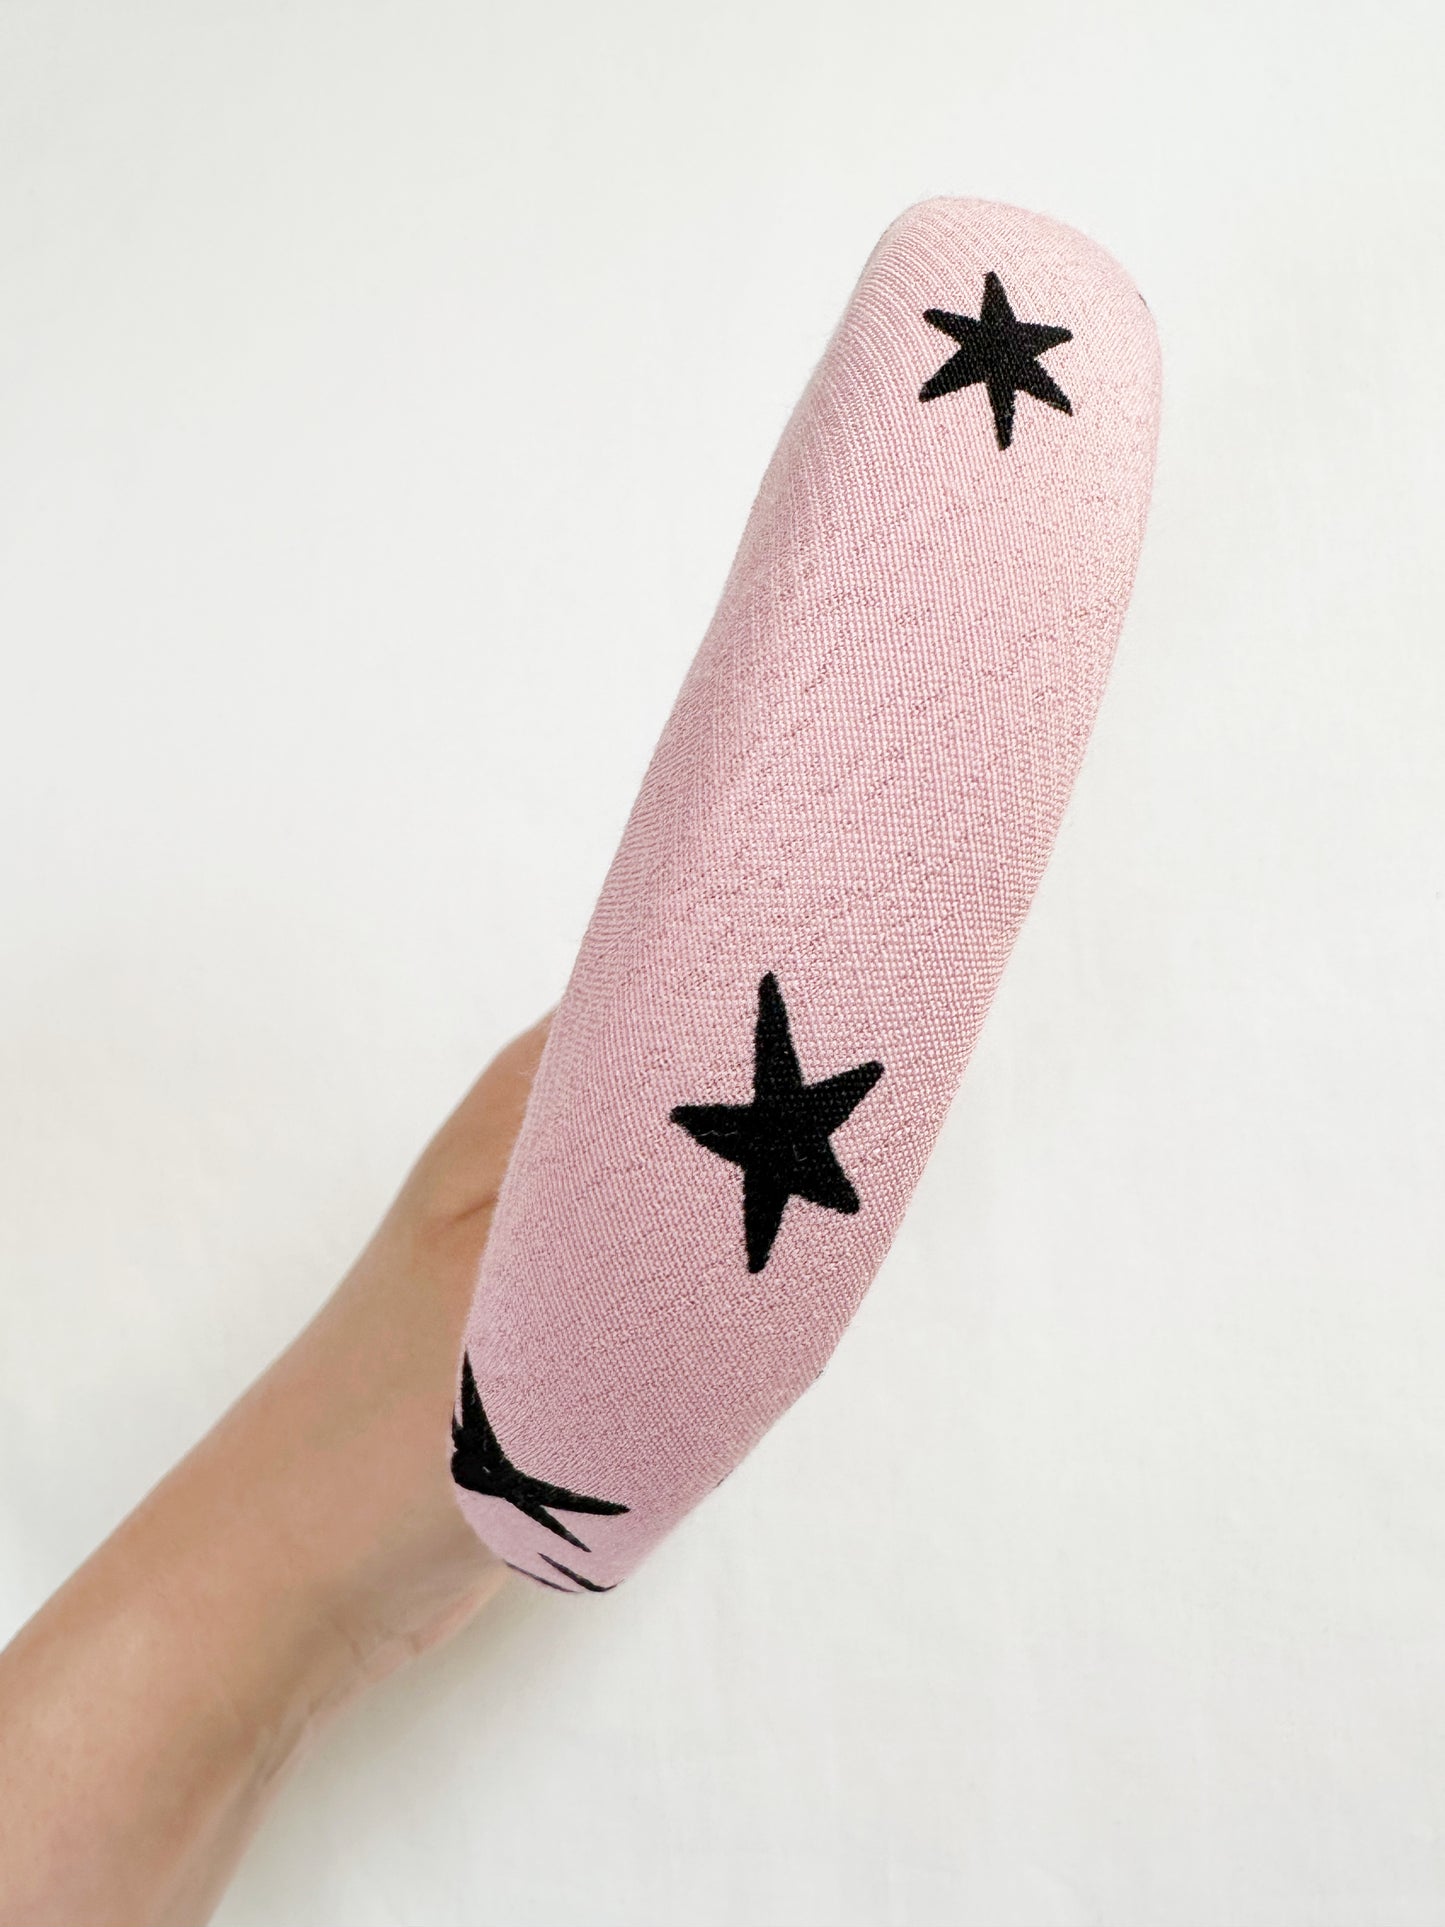 Padded headband in pink and black star print.